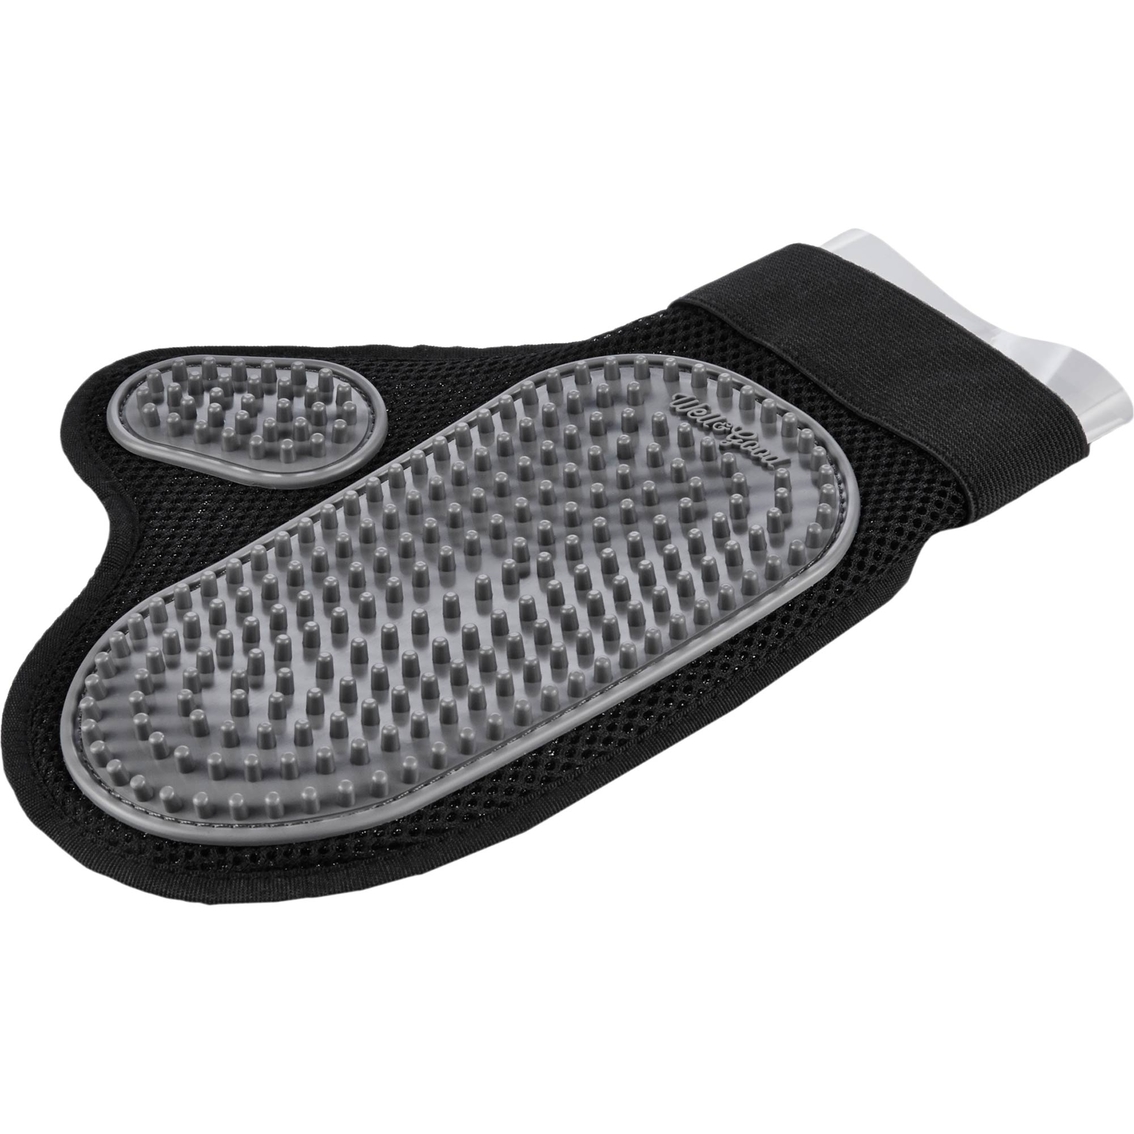 Well & Good 3 in 1 Dog Grooming Mitt, Black - Image 2 of 3